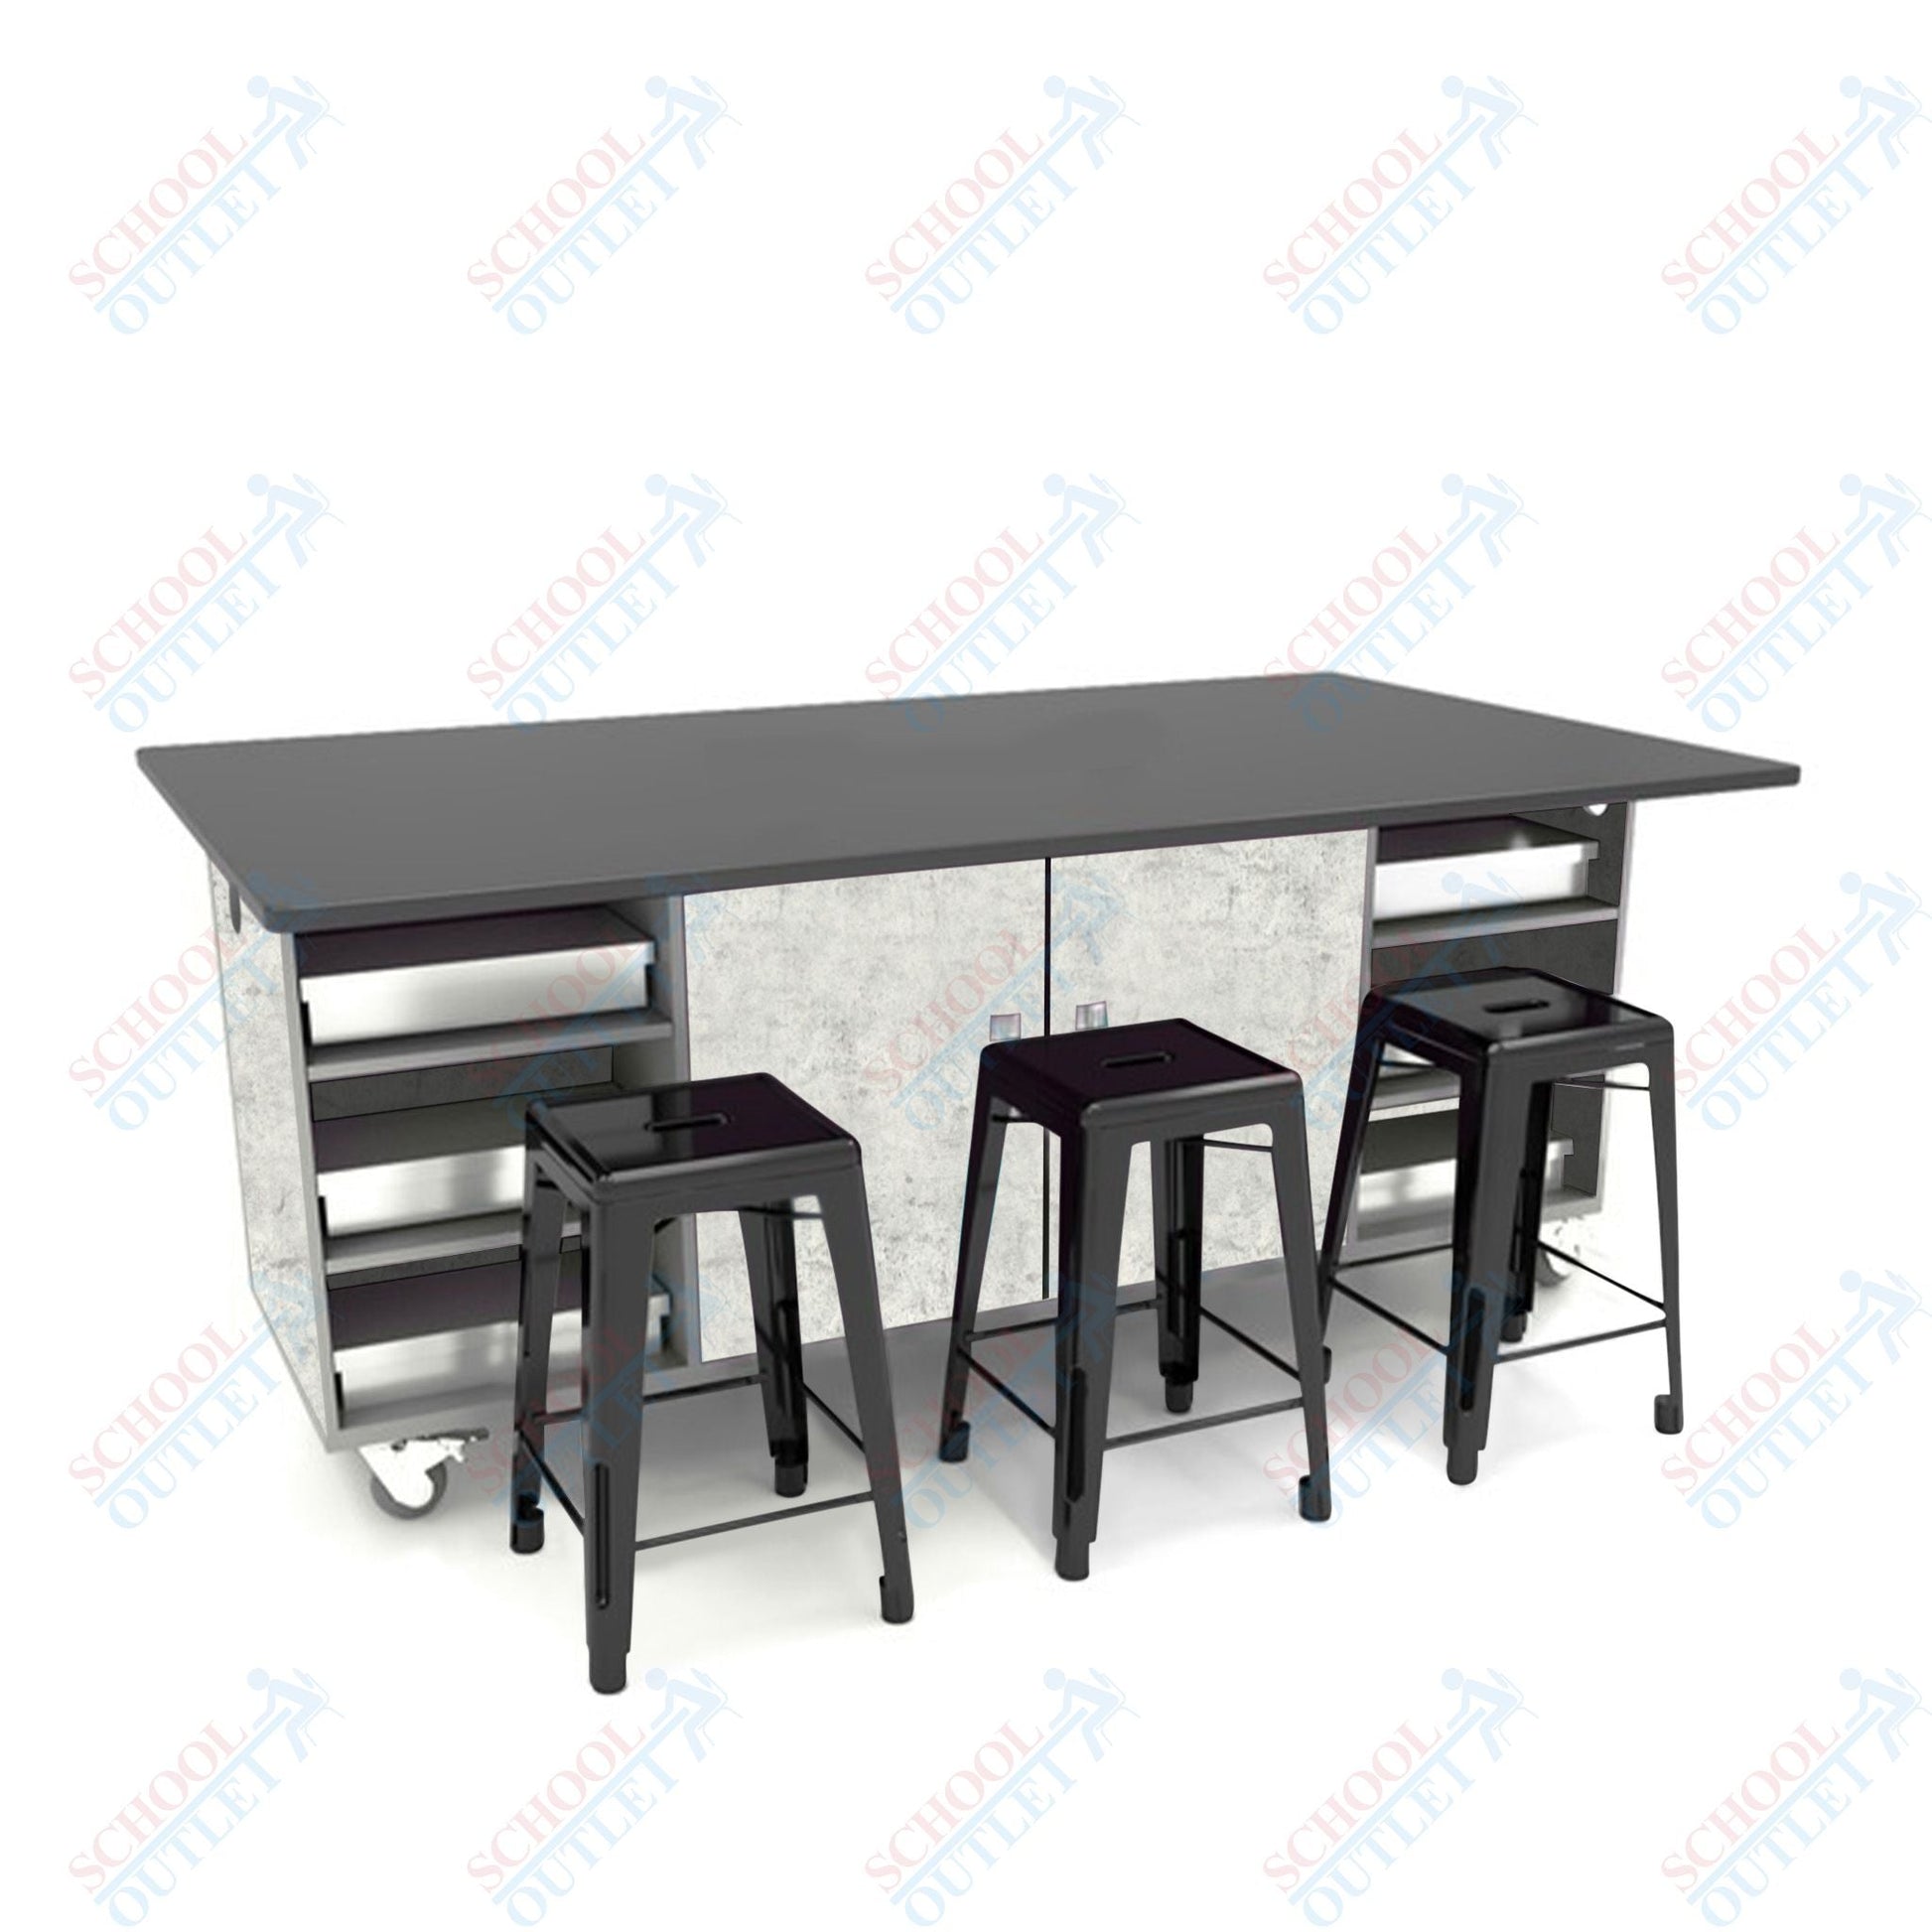 CEF ED Double Table 36"H Chemical Resistant Top, Laminate Base with 6 Stools, Storage bins, and Electrical Outlets Included. - SchoolOutlet